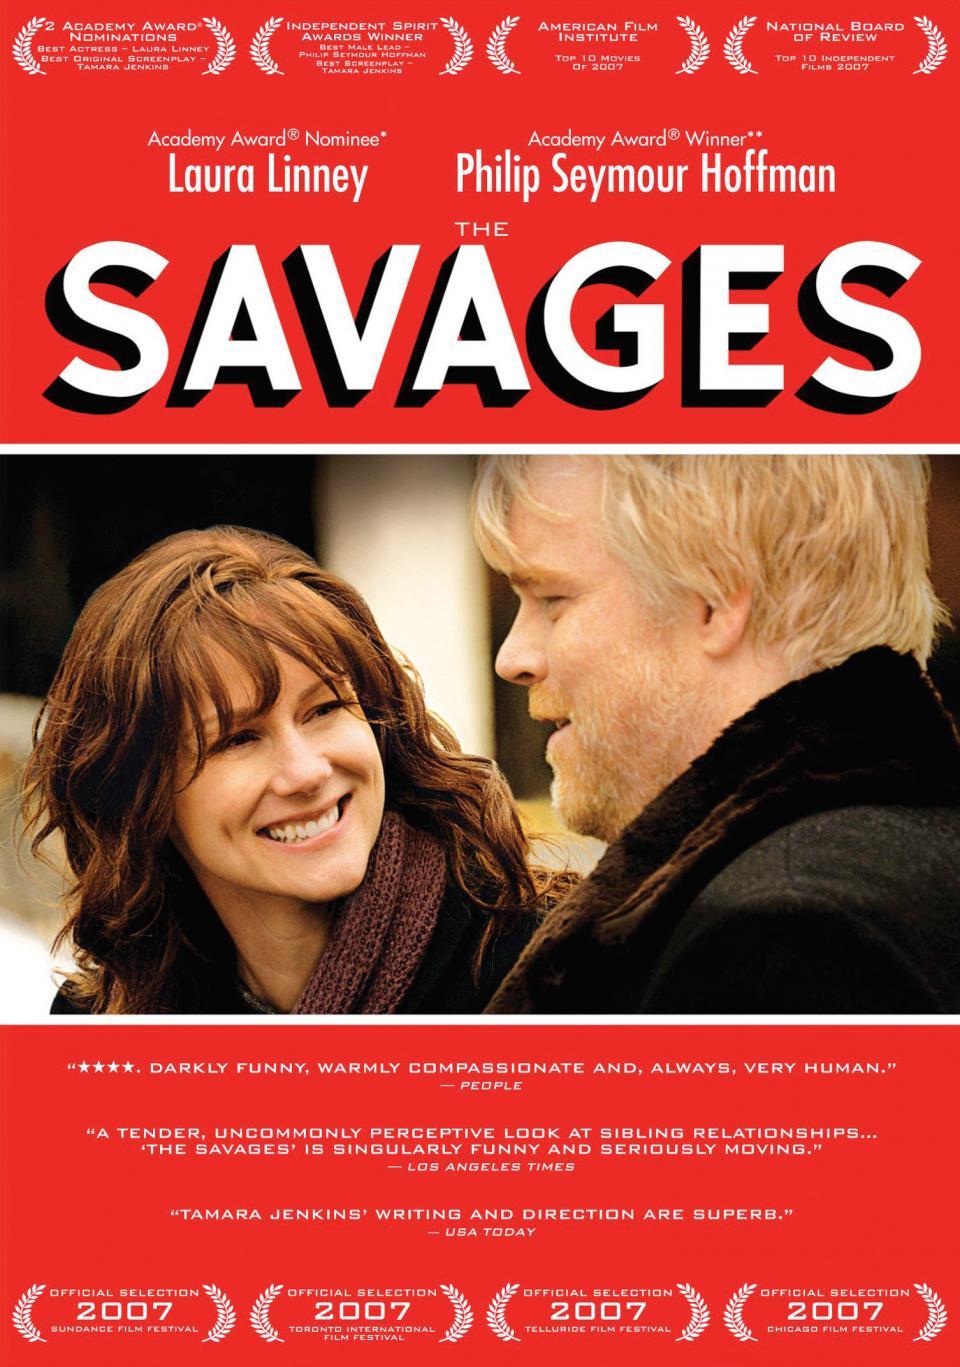 The Savages - Movie that will change your life